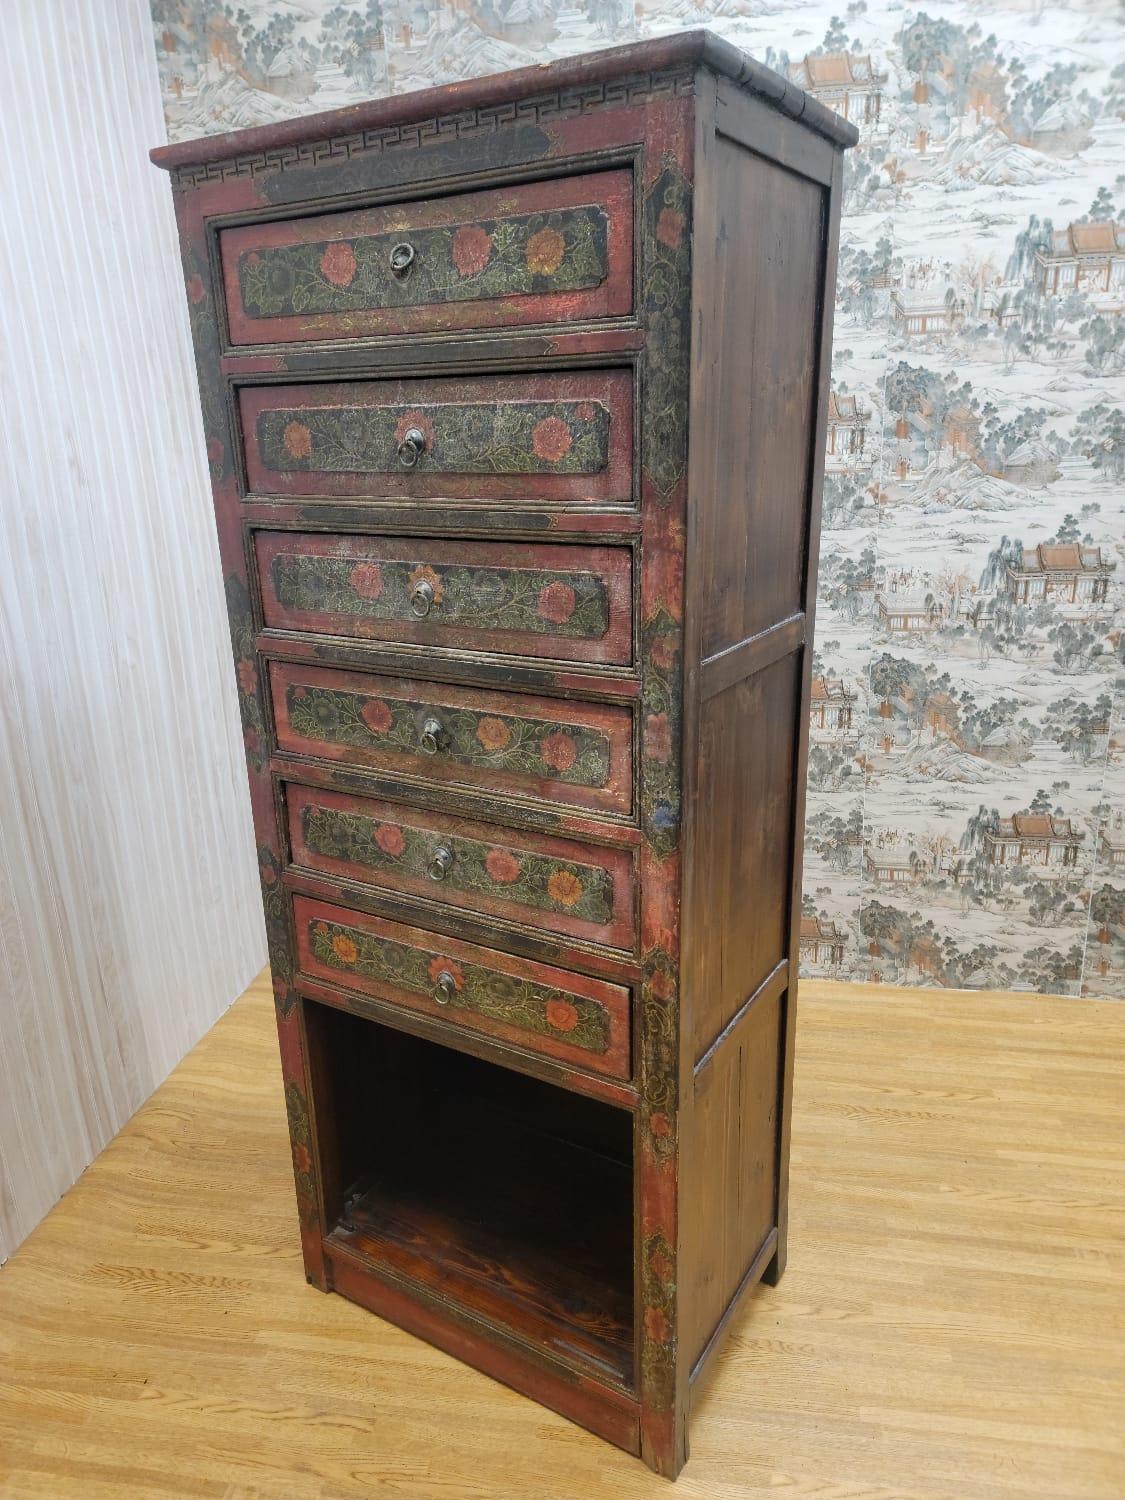 Antique hand painted Tibetan cabinet with drawers and display shelf

Original floral painting

The cabinet has 6 drawers and 1 display shelf

Circa: 1900s

Dimensions:

W 28